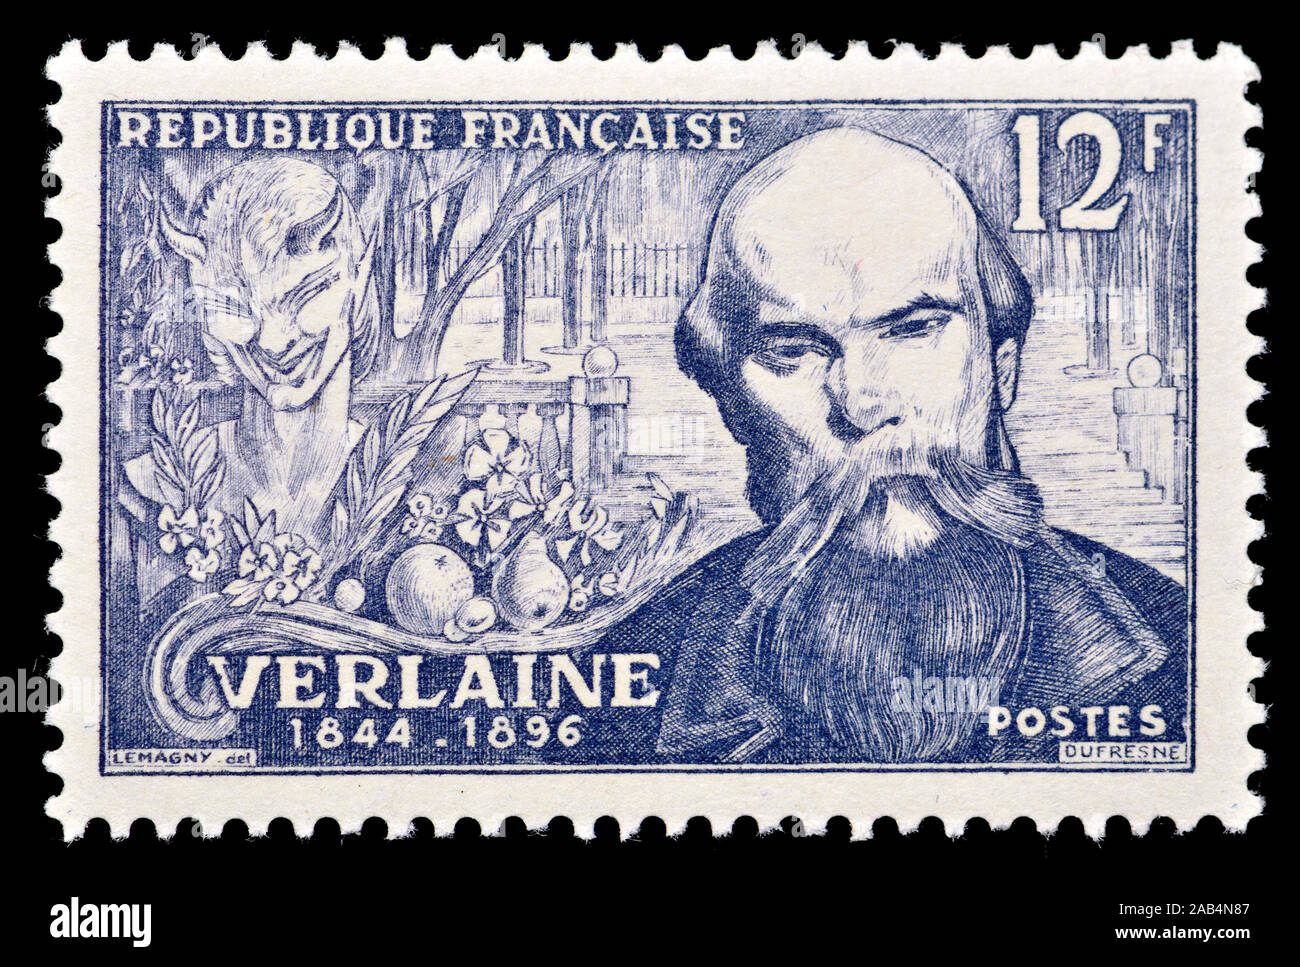 French postage stamp (1951) : Paul-Marie Verlaine (1844 – 1896) French poet associated with the Decadent movement. Stock Photo